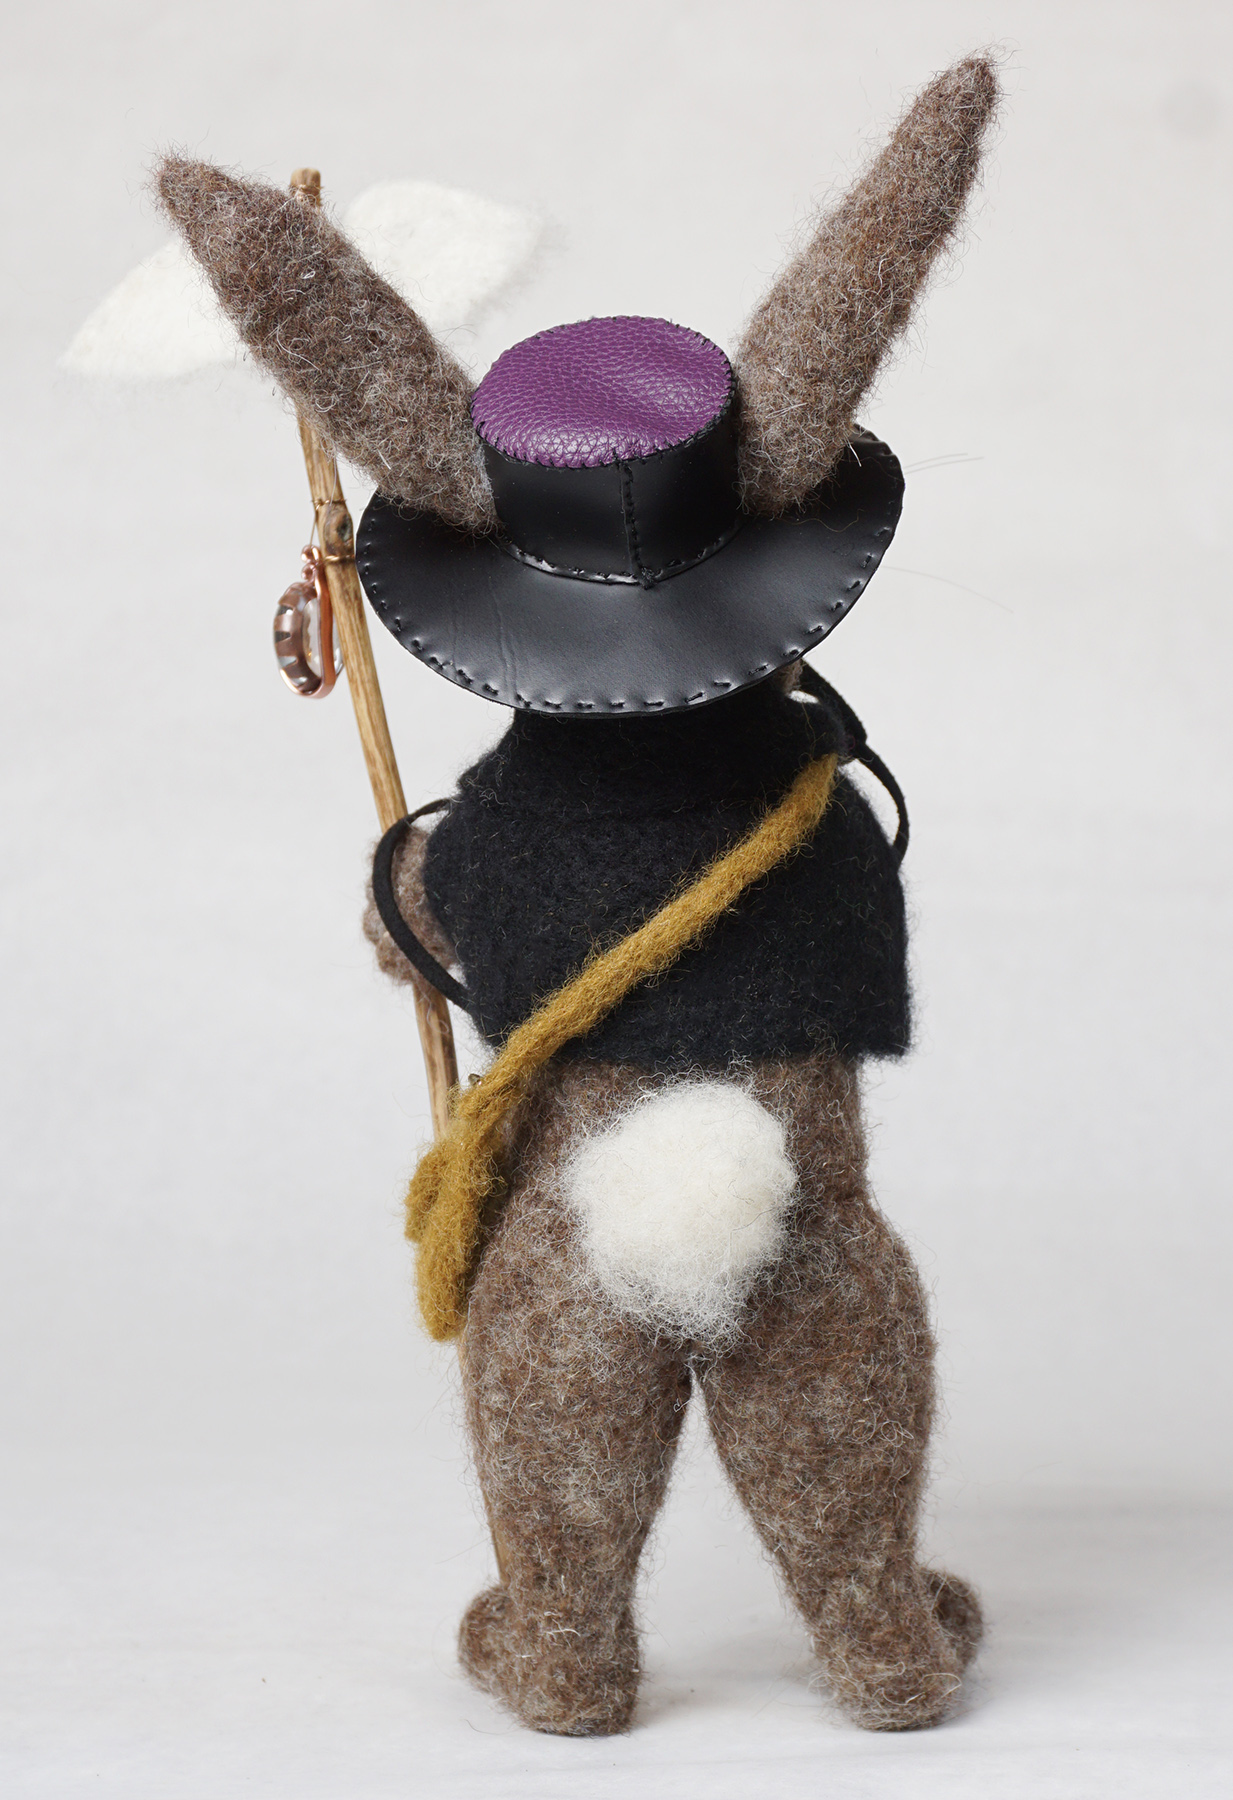 What's Up Doc is an anthropomorphic rabbit plague doctor art doll sculpture. Needle felted wool over wire and batting armature, glass bead, faux leather and suede embellishment.